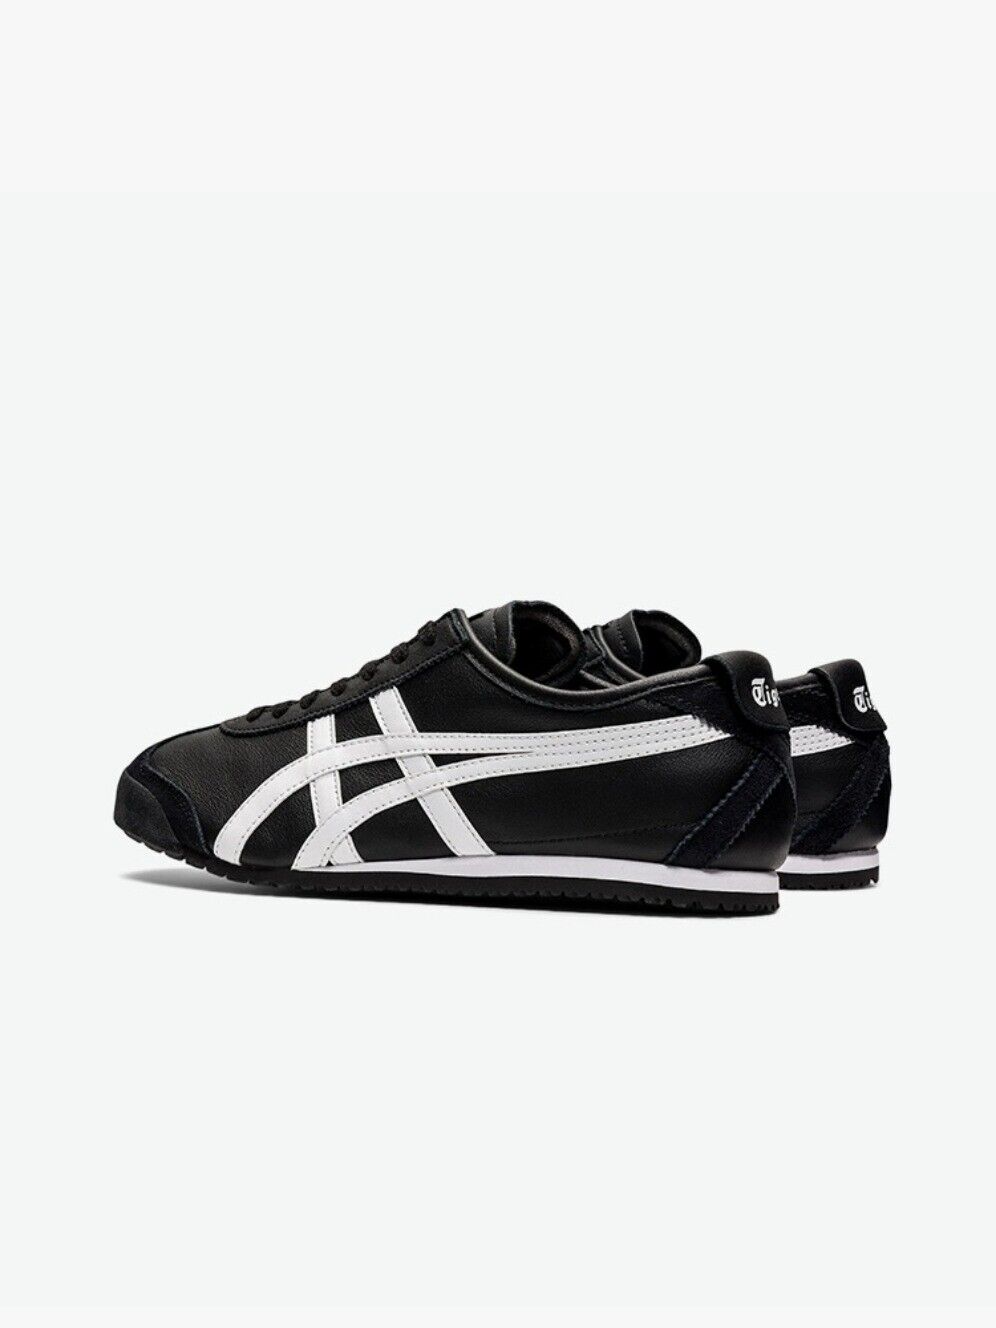 Onitsuka Tiger MEXICO 66 New Classic Unisex Shoes Black/White Retro Sneakers2024